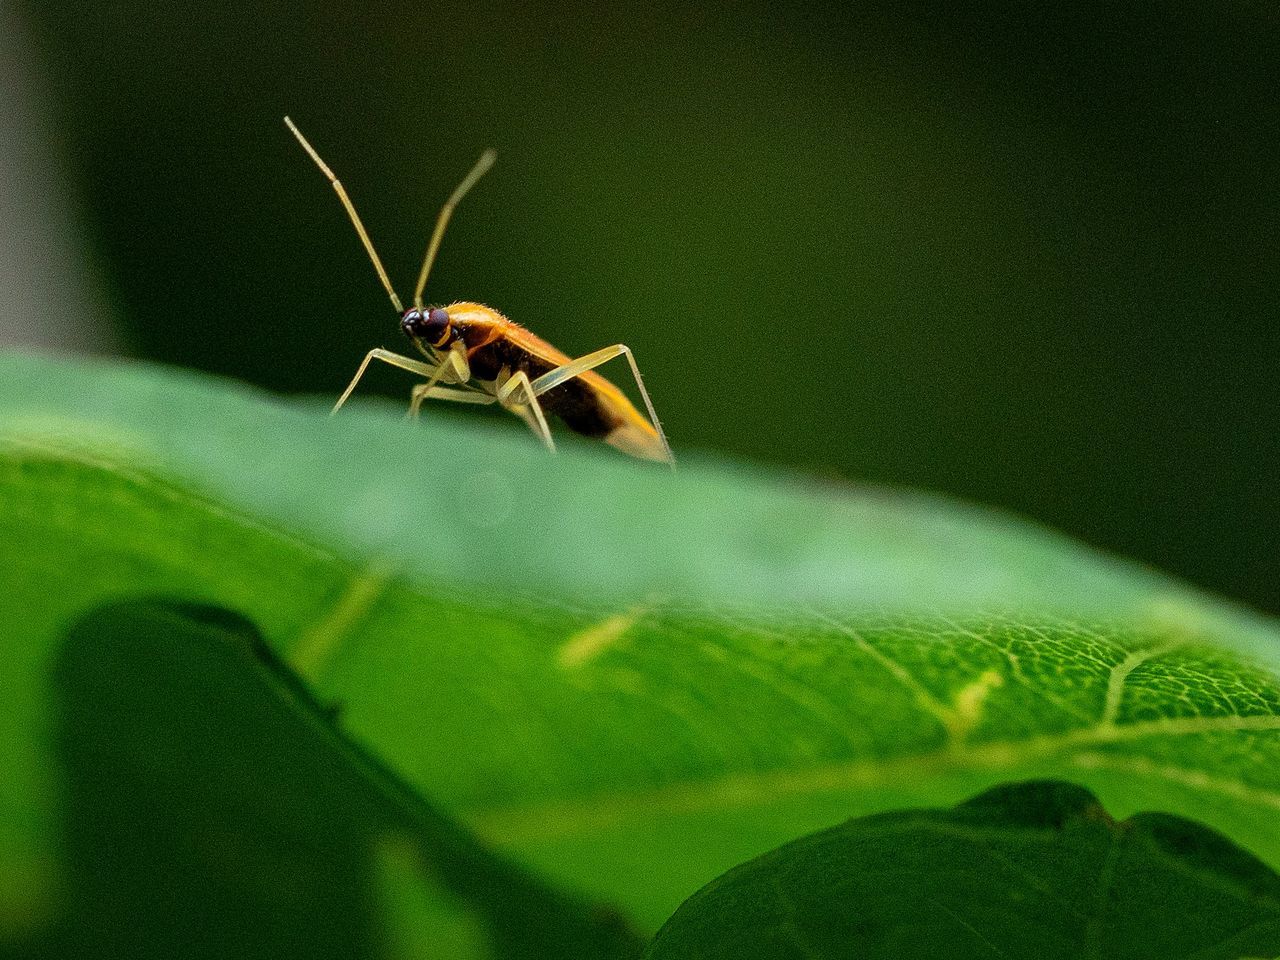 invertebrate, insect, plant part, leaf, animals in the wild, animal wildlife, one animal, animal themes, animal, green color, close-up, selective focus, nature, plant, day, no people, growth, beauty in nature, outdoors, animal body part